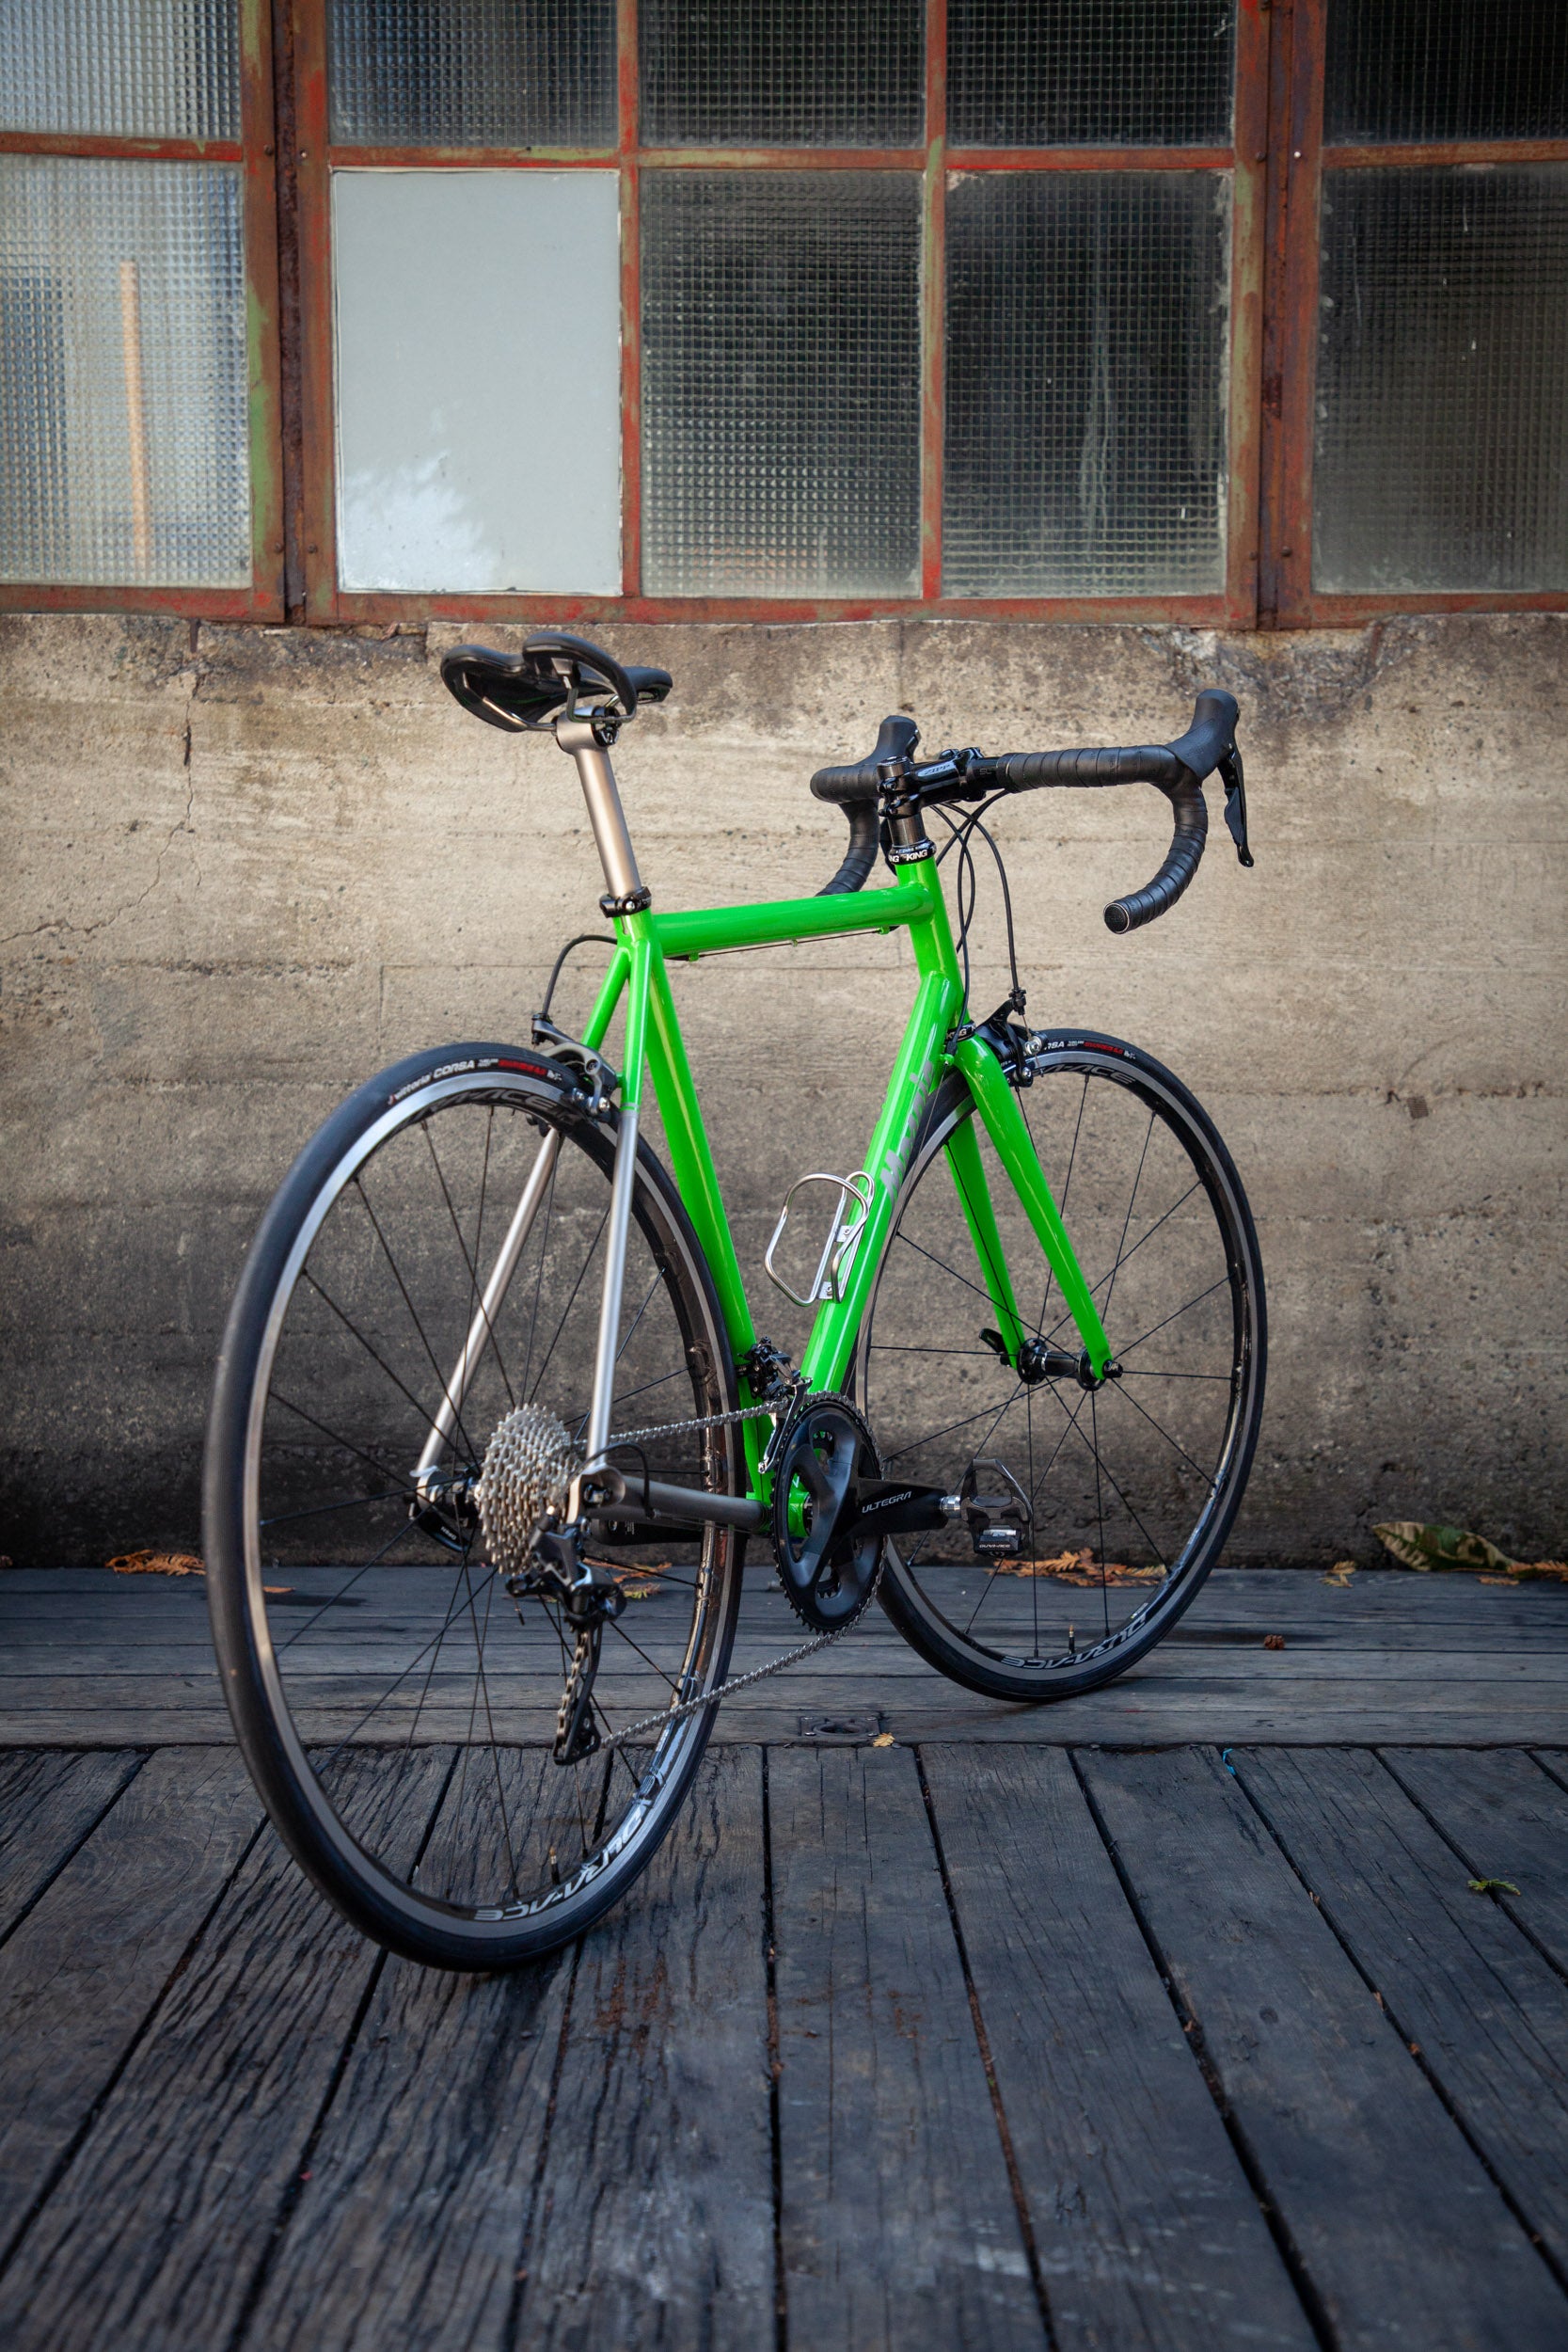 Gallery: A Lime Green Titanium Steed